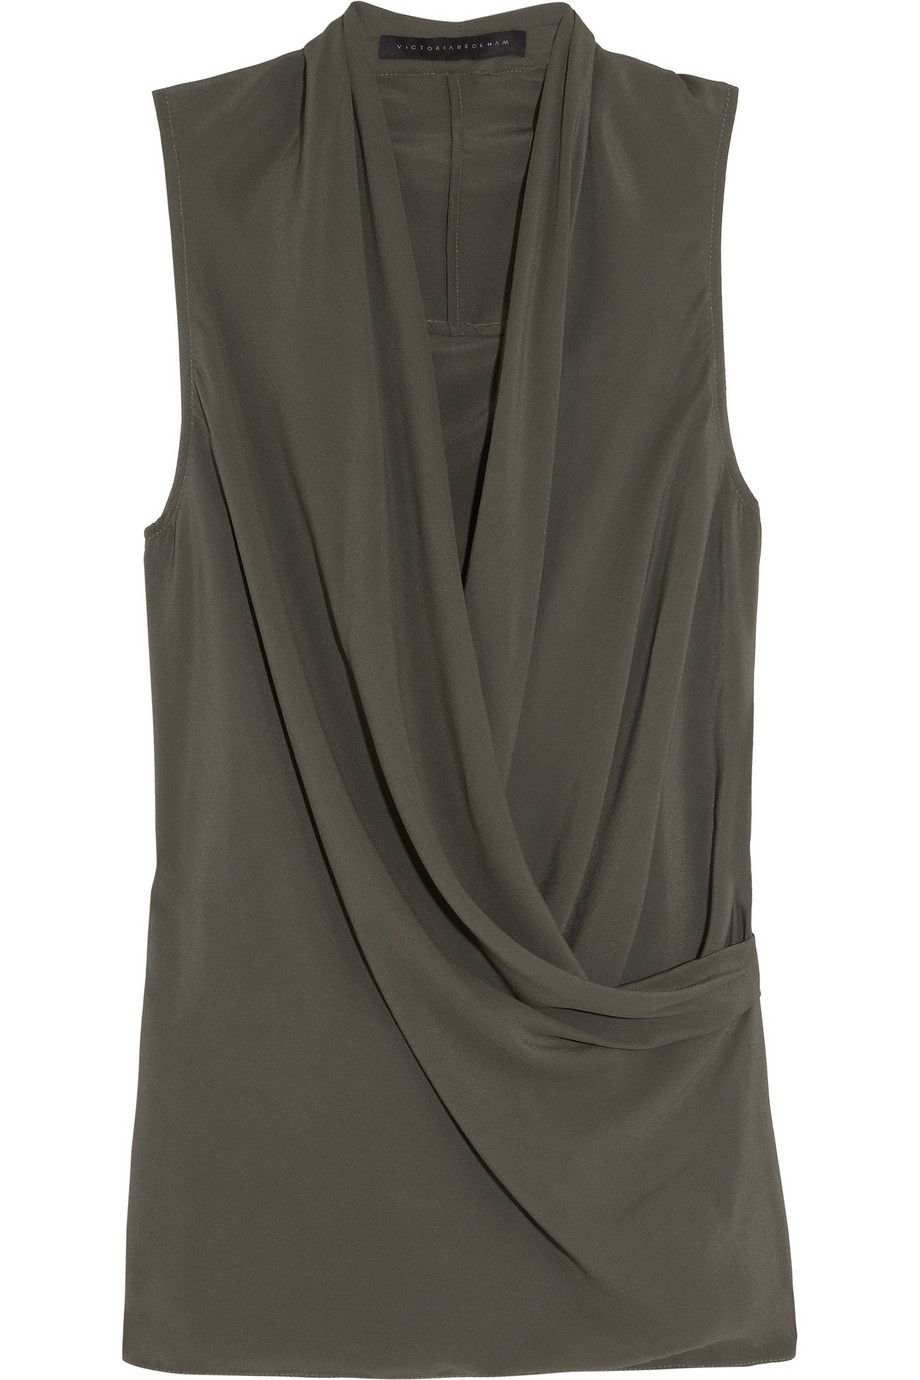 Victoria Beckham Draped Crepe Top in Green - Lyst